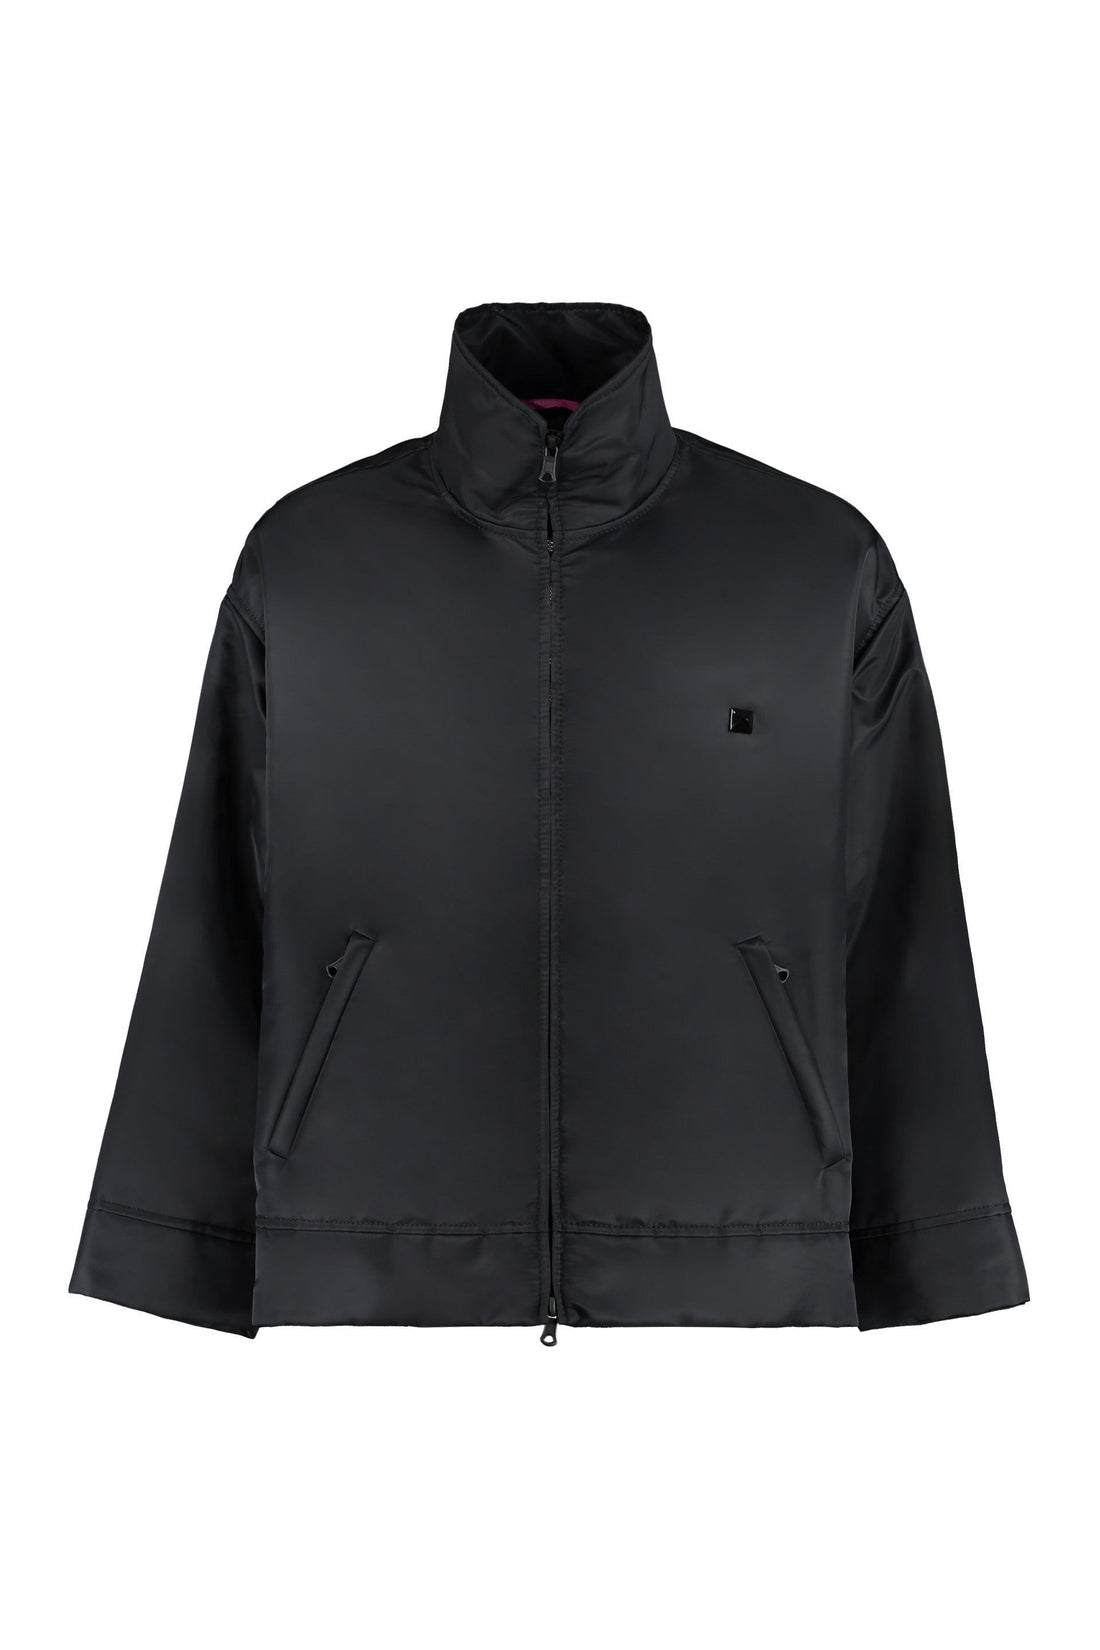 Valentino-OUTLET-SALE-Techno fabric jacket-ARCHIVIST